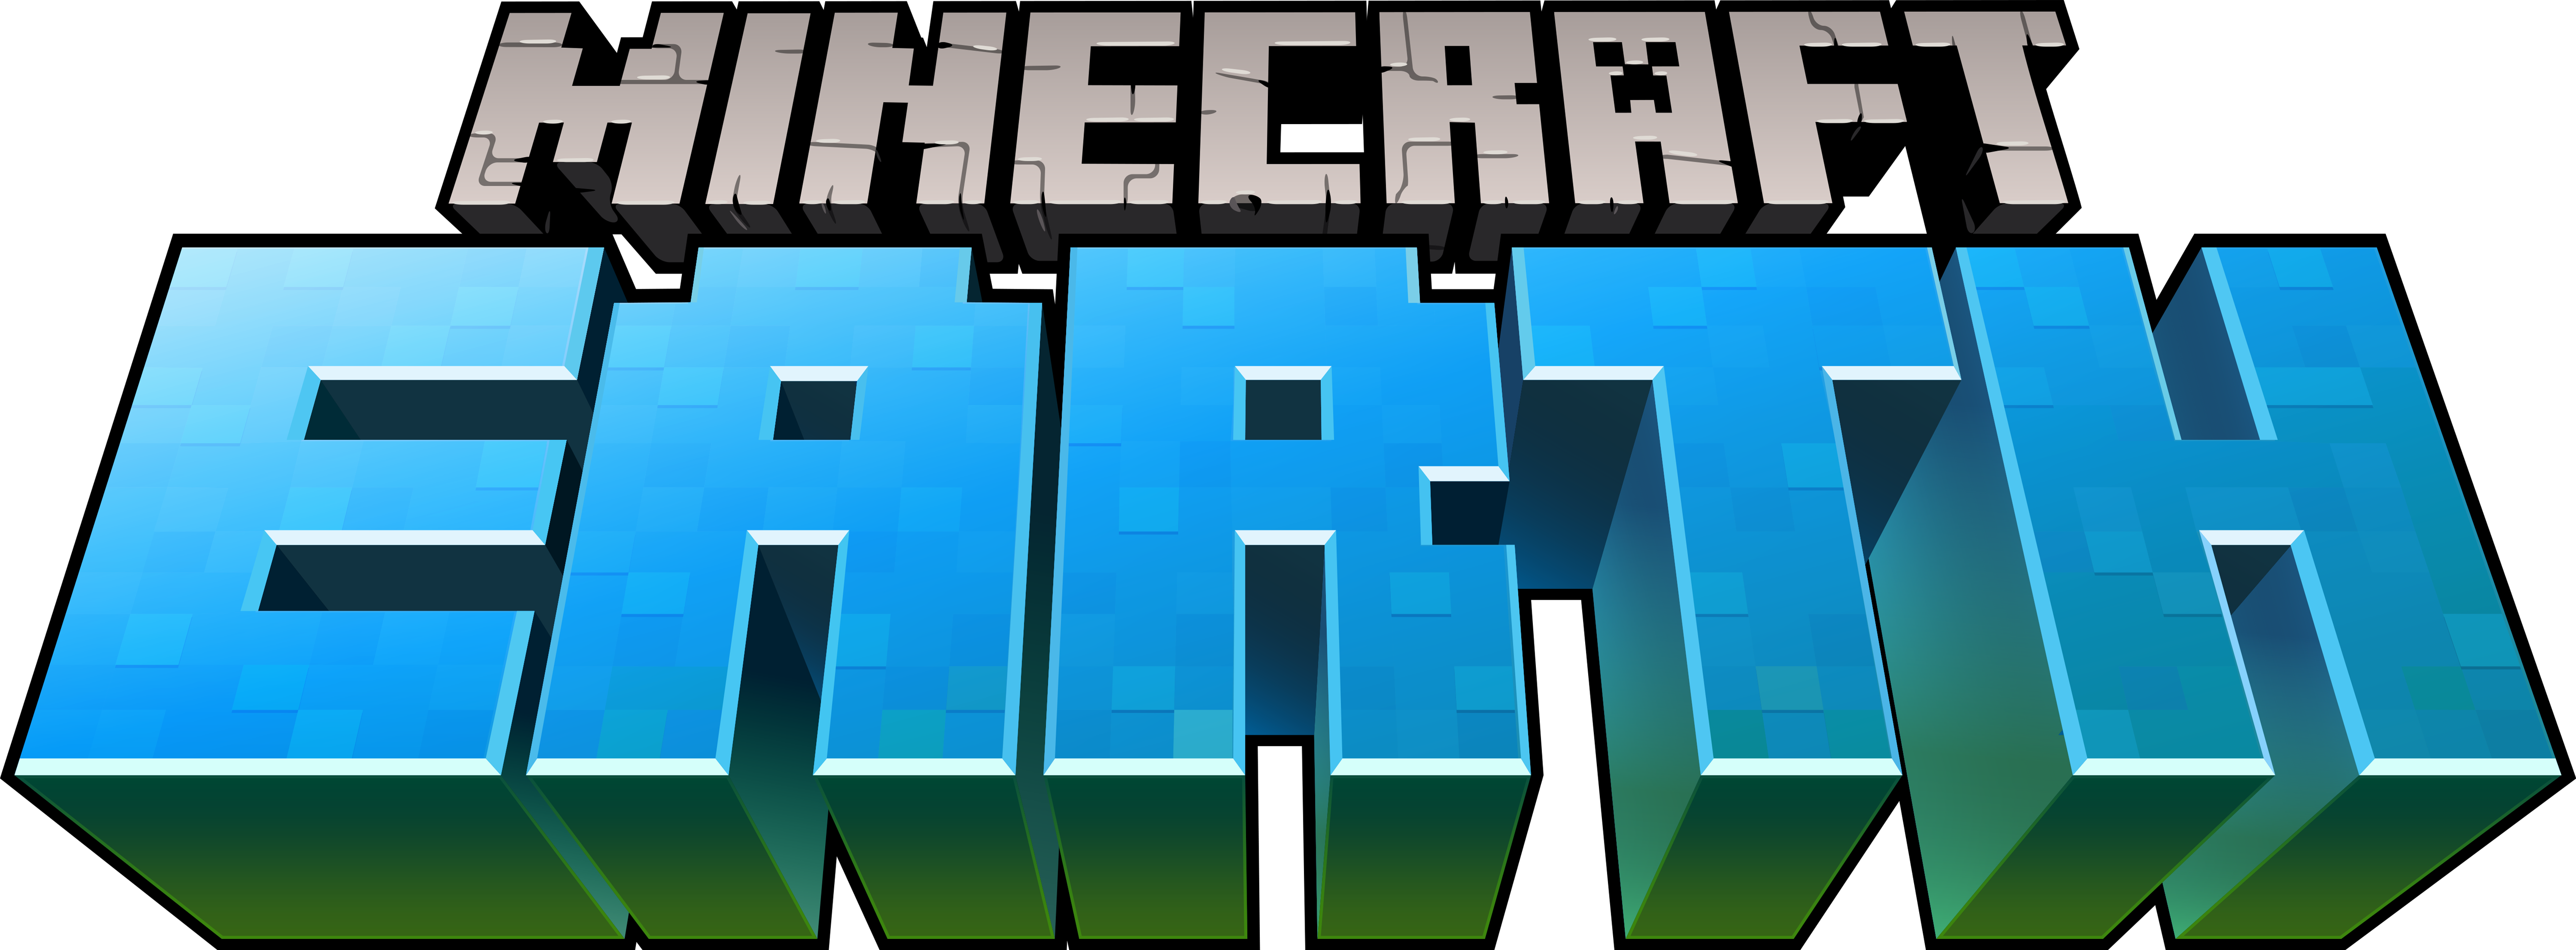 Minecraft Earth para Android - Download